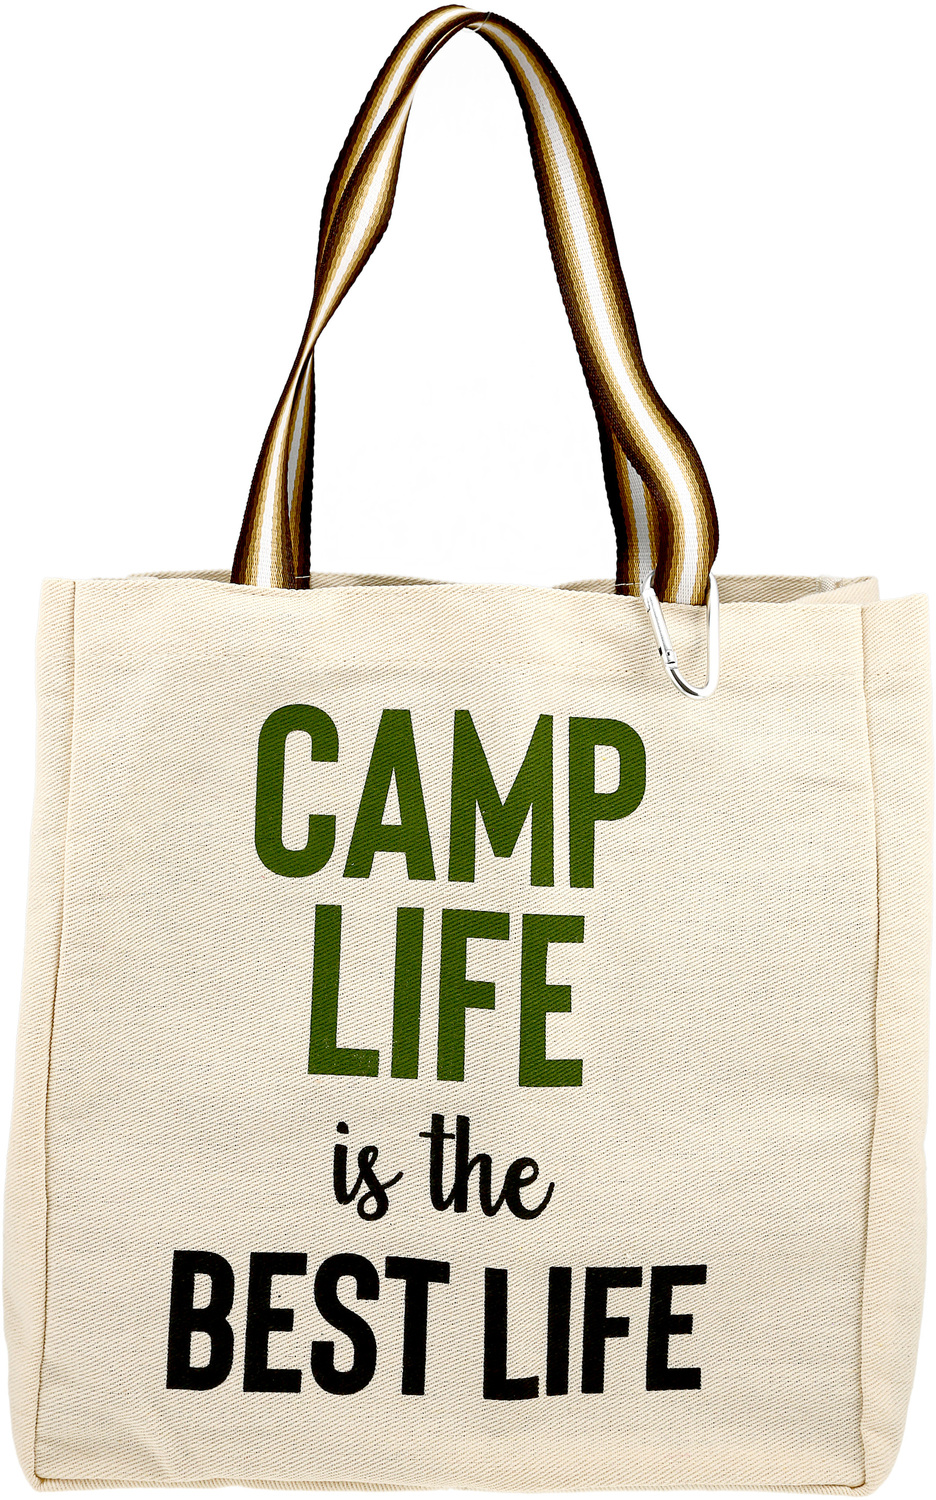 Camp Life by Check Me Out - Camp Life - 100% Cotton Twill Gift Bag